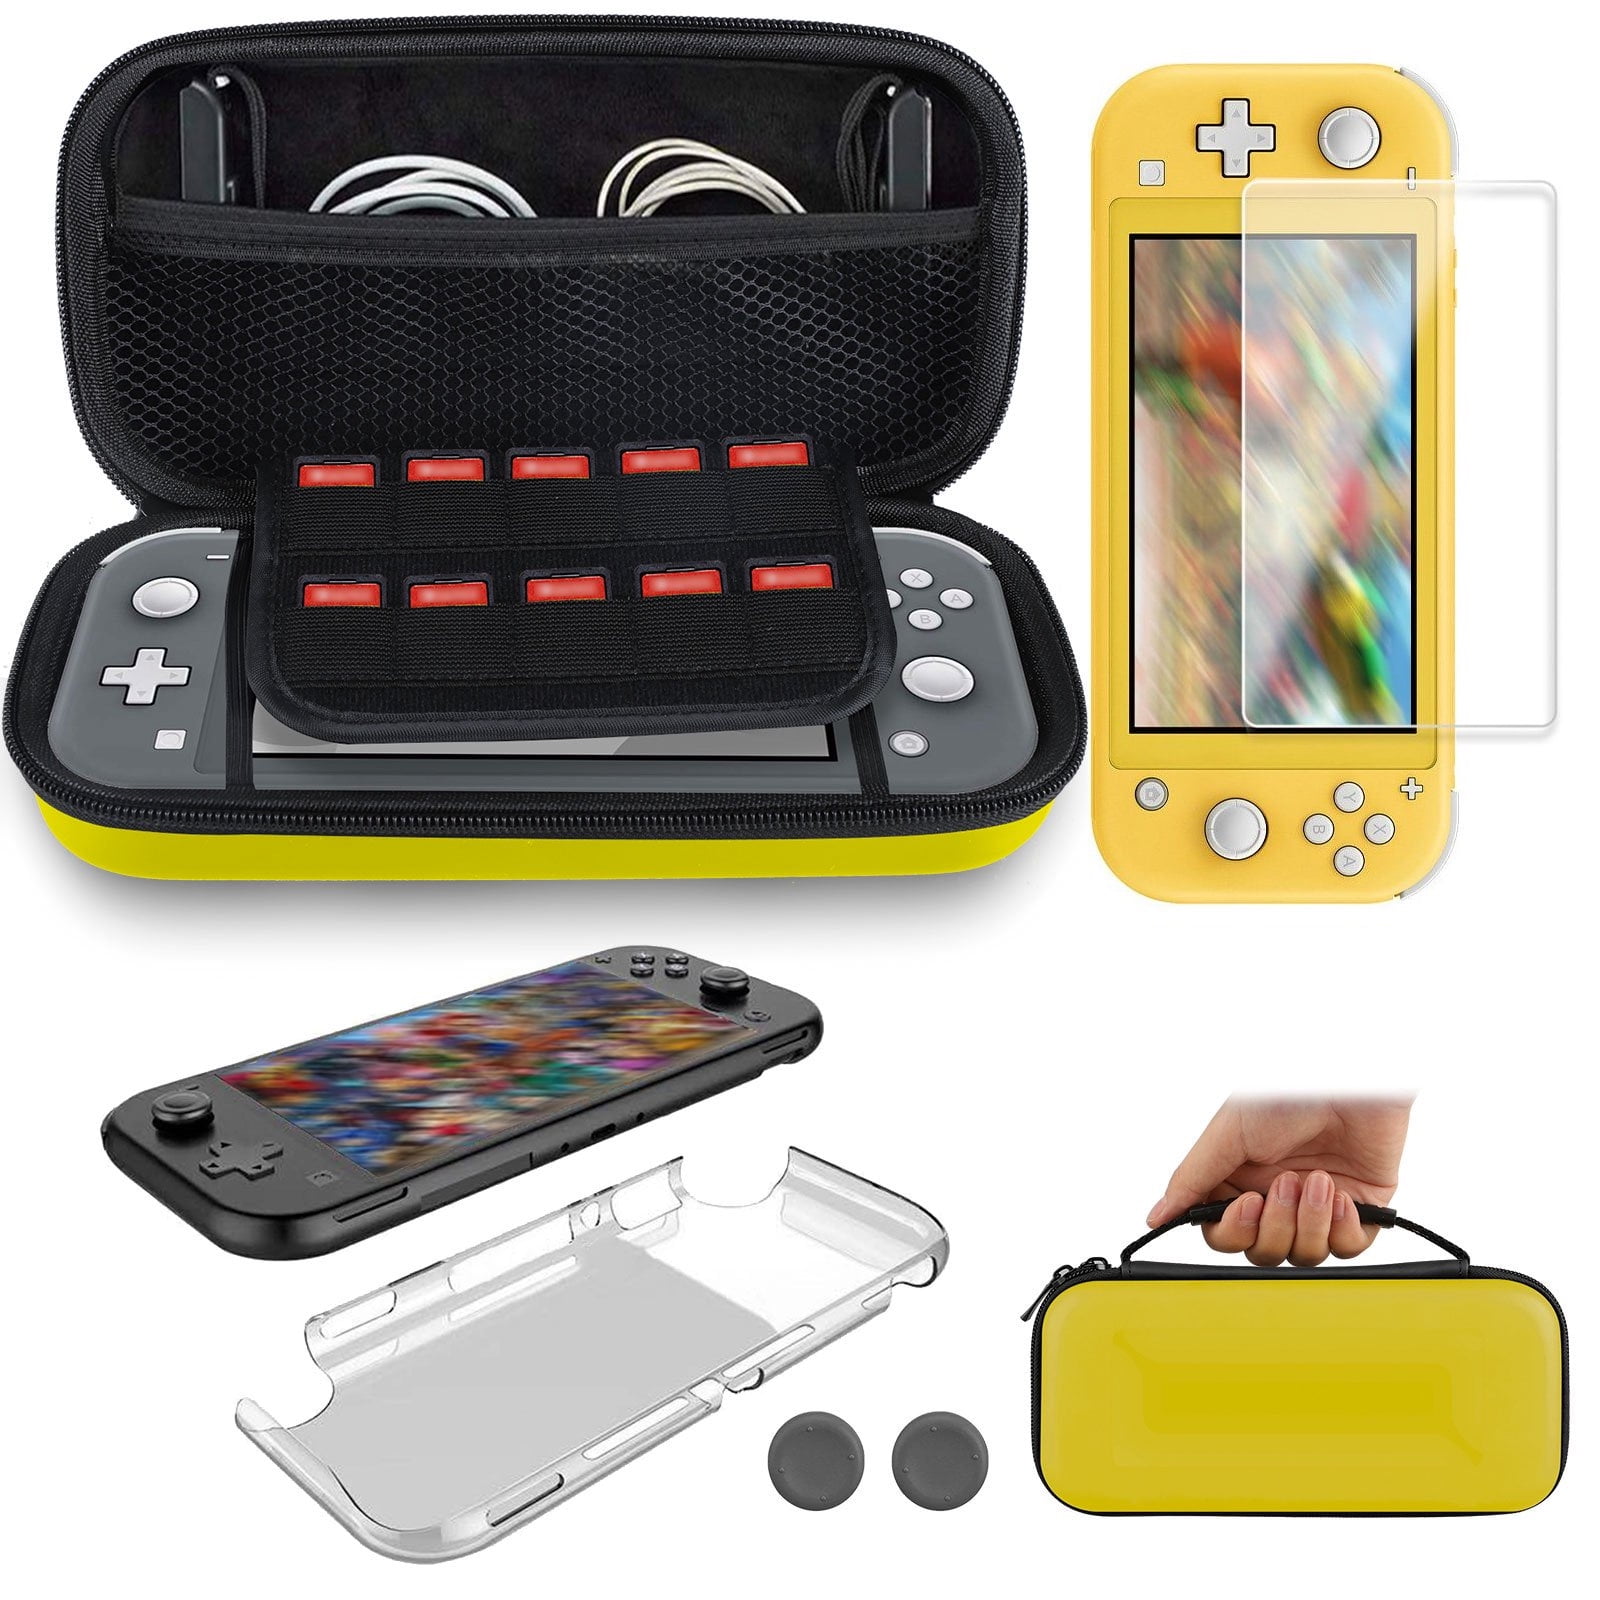 5-in-1 Carry Case Fit for Nintendo EEEkit Accessories Kit with Hard Shell Protective Carrying Travel Bag, Clear Cover Case, Screen Protector, Thumb Caps, 10 Game Slots - Walmart.com